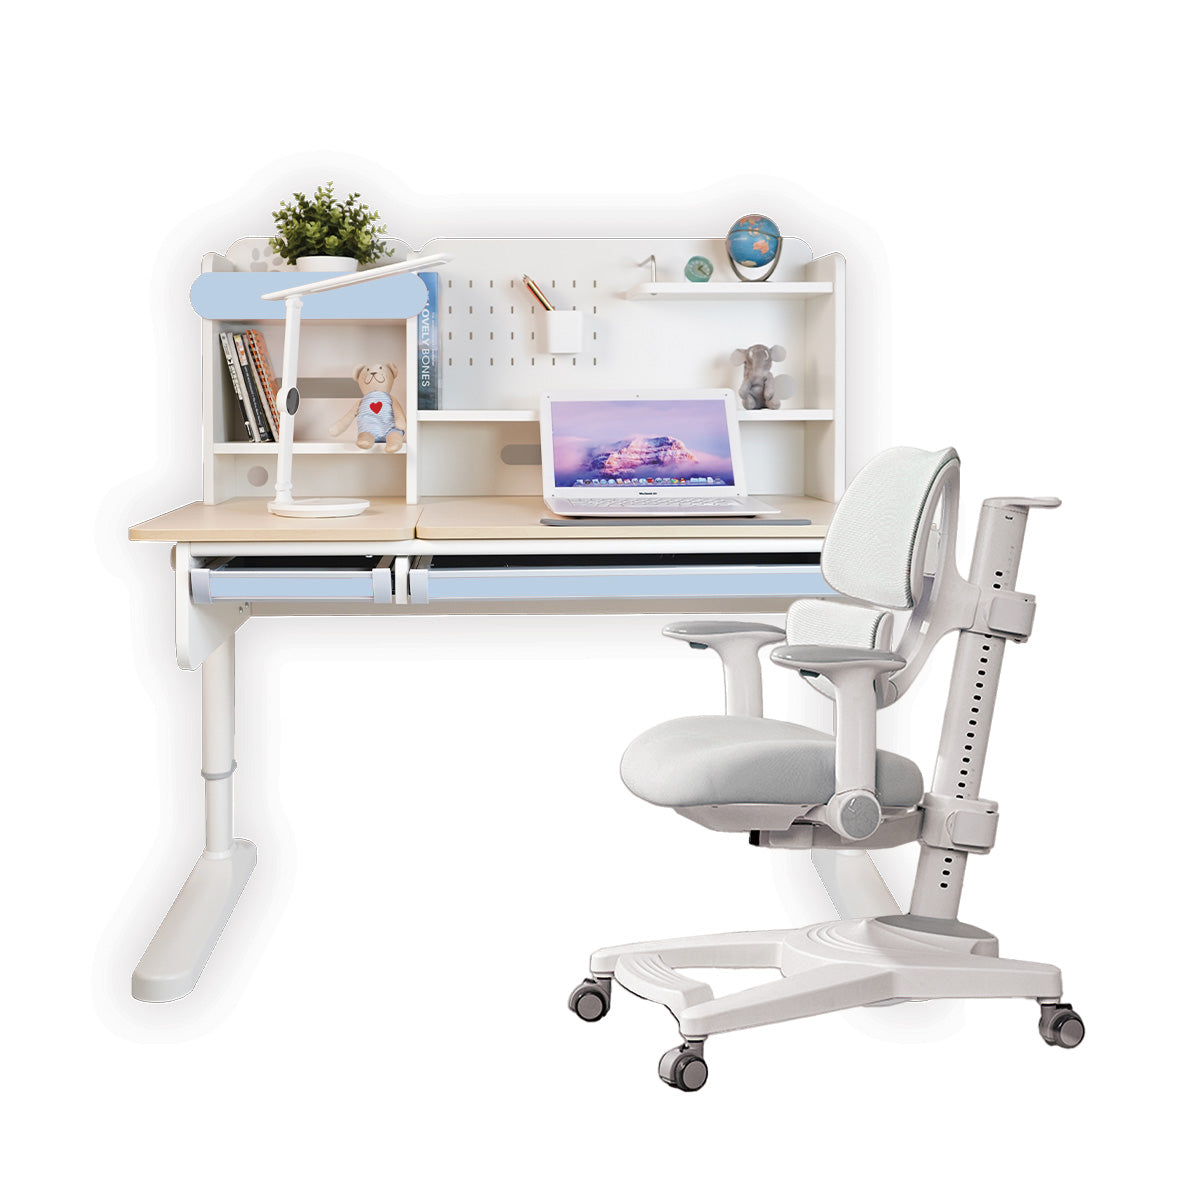 Impact Ergo-Growing Study Desk And Chair Set 1200mm x 650mm, IM-G1200A-BL